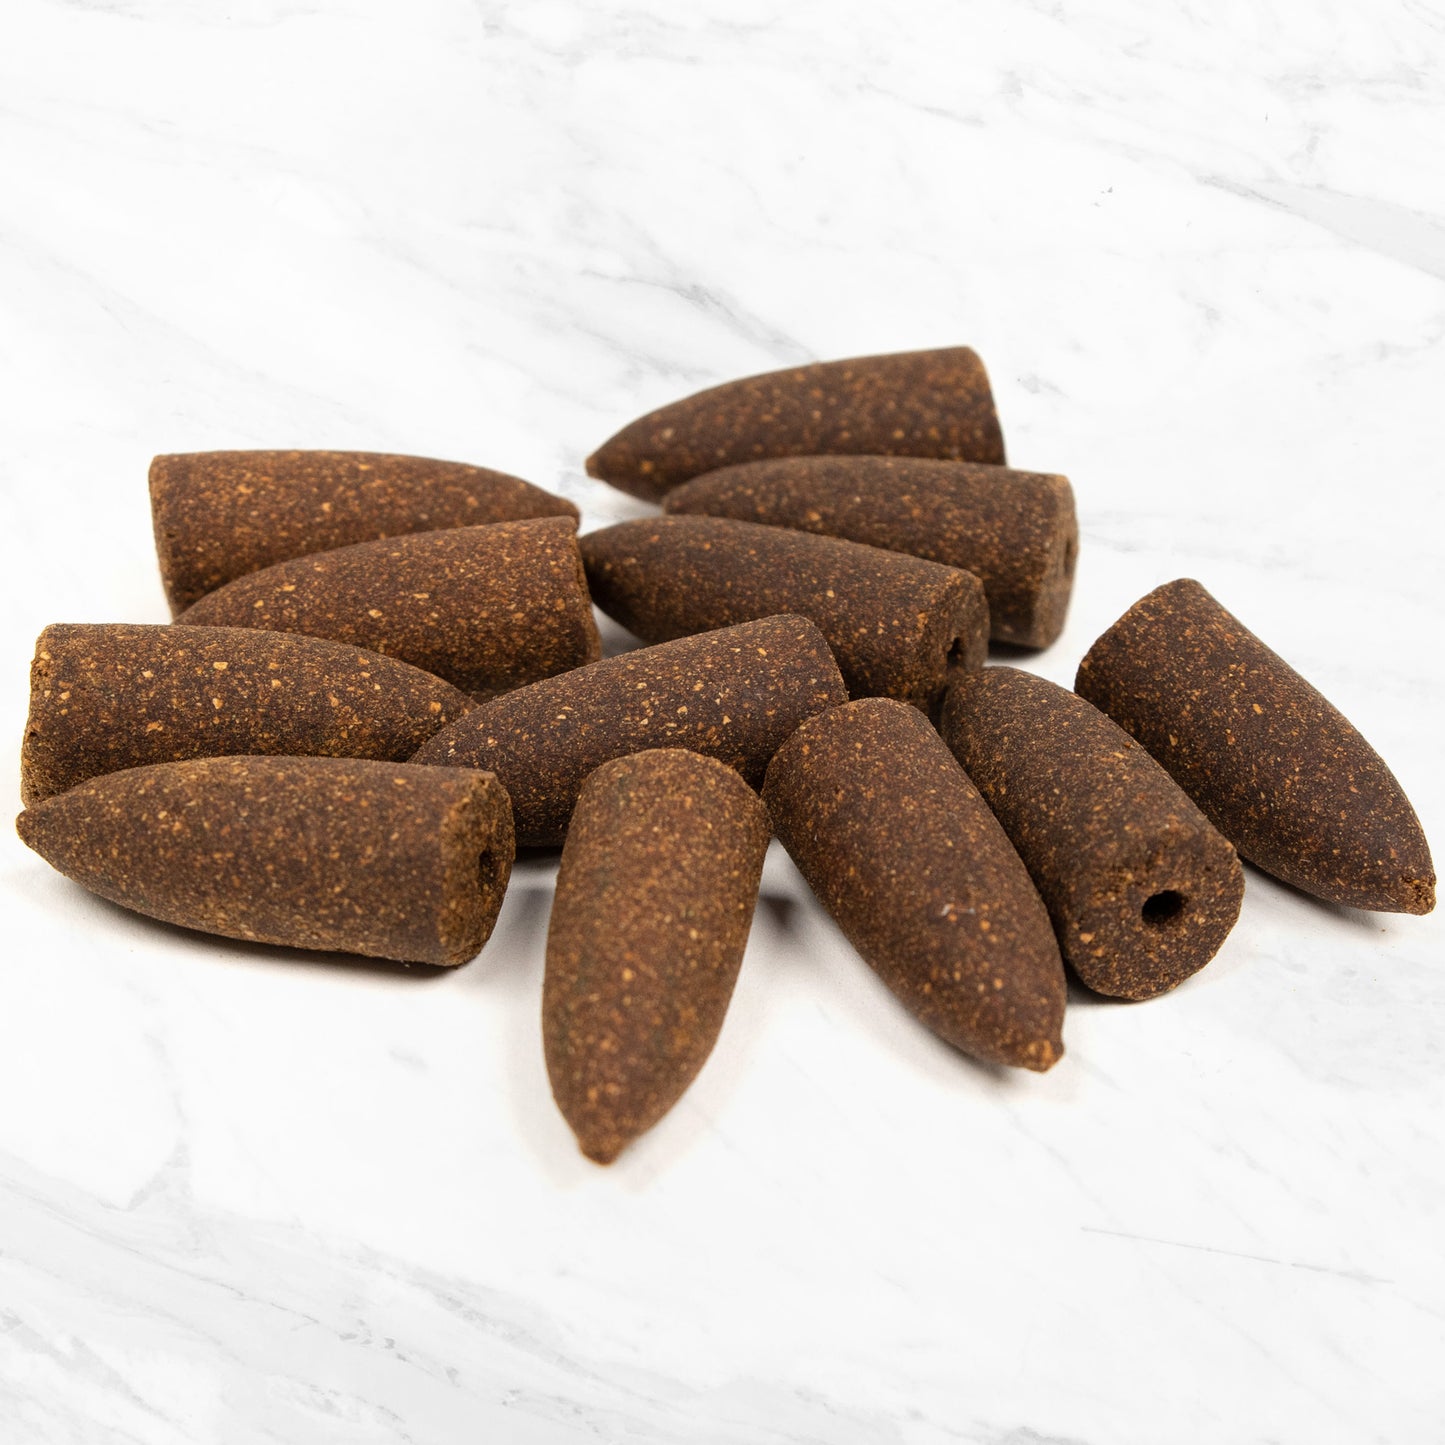 Backflow Incense Cones - Frankincense Anxiety Away